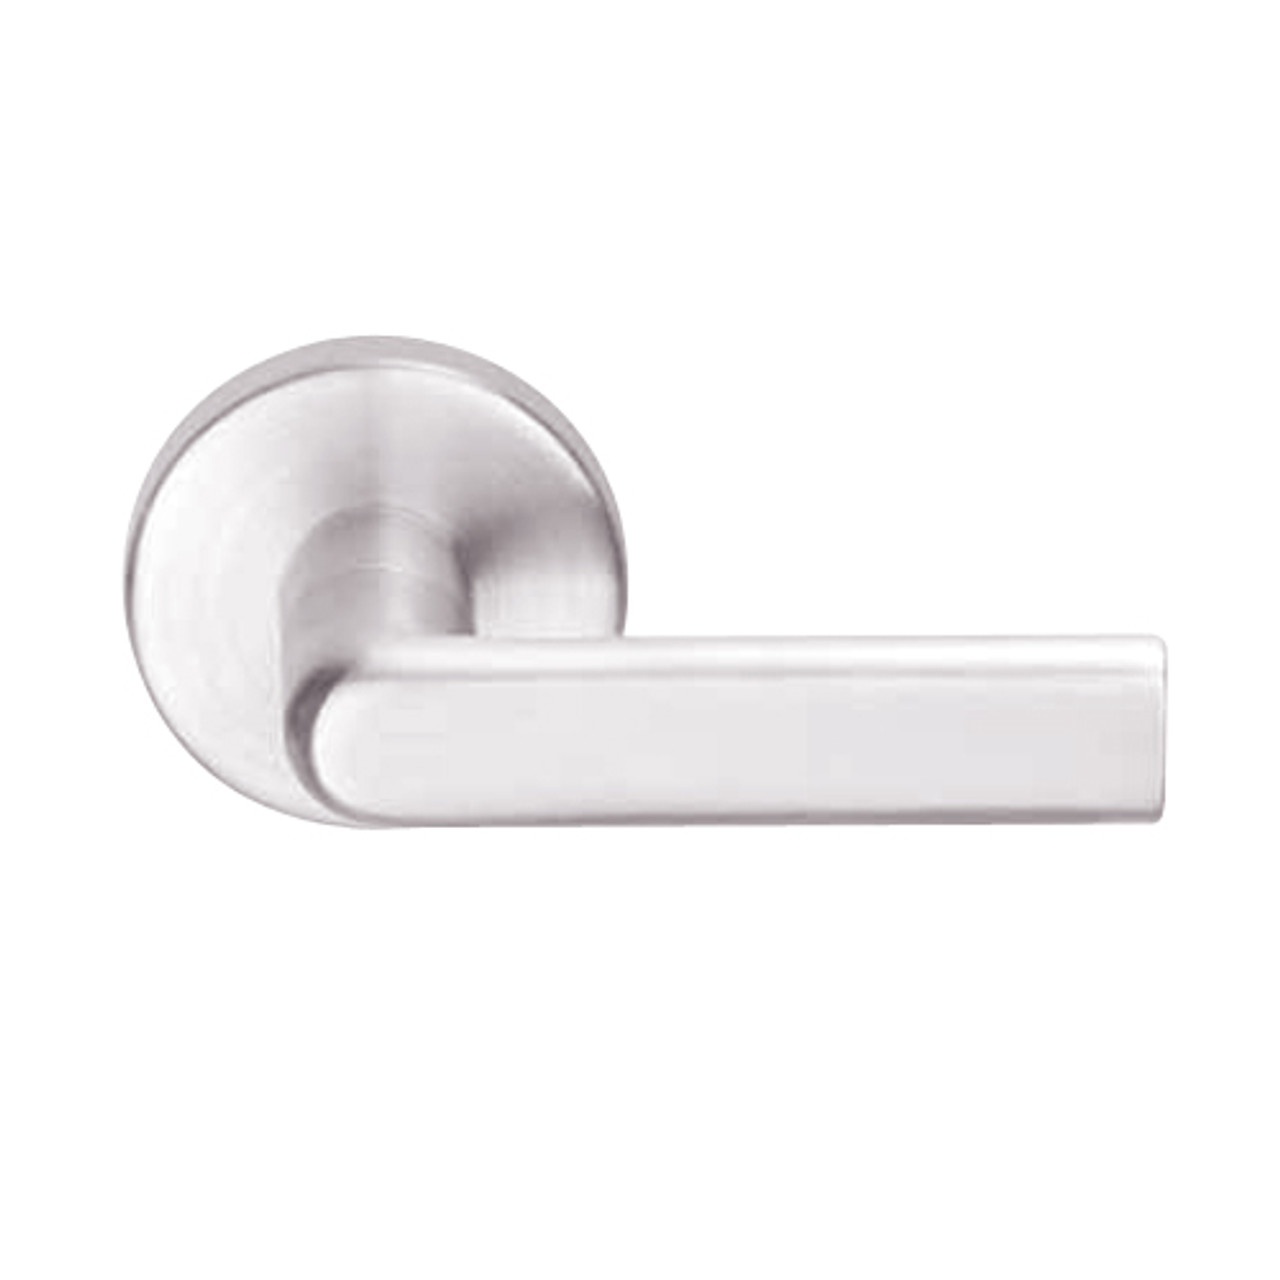 L9456L-01A-629 Schlage L Series Less Cylinder Corridor with Deadbolt Commercial Mortise Lock with 01 Cast Lever Design in Bright Stainless Steel